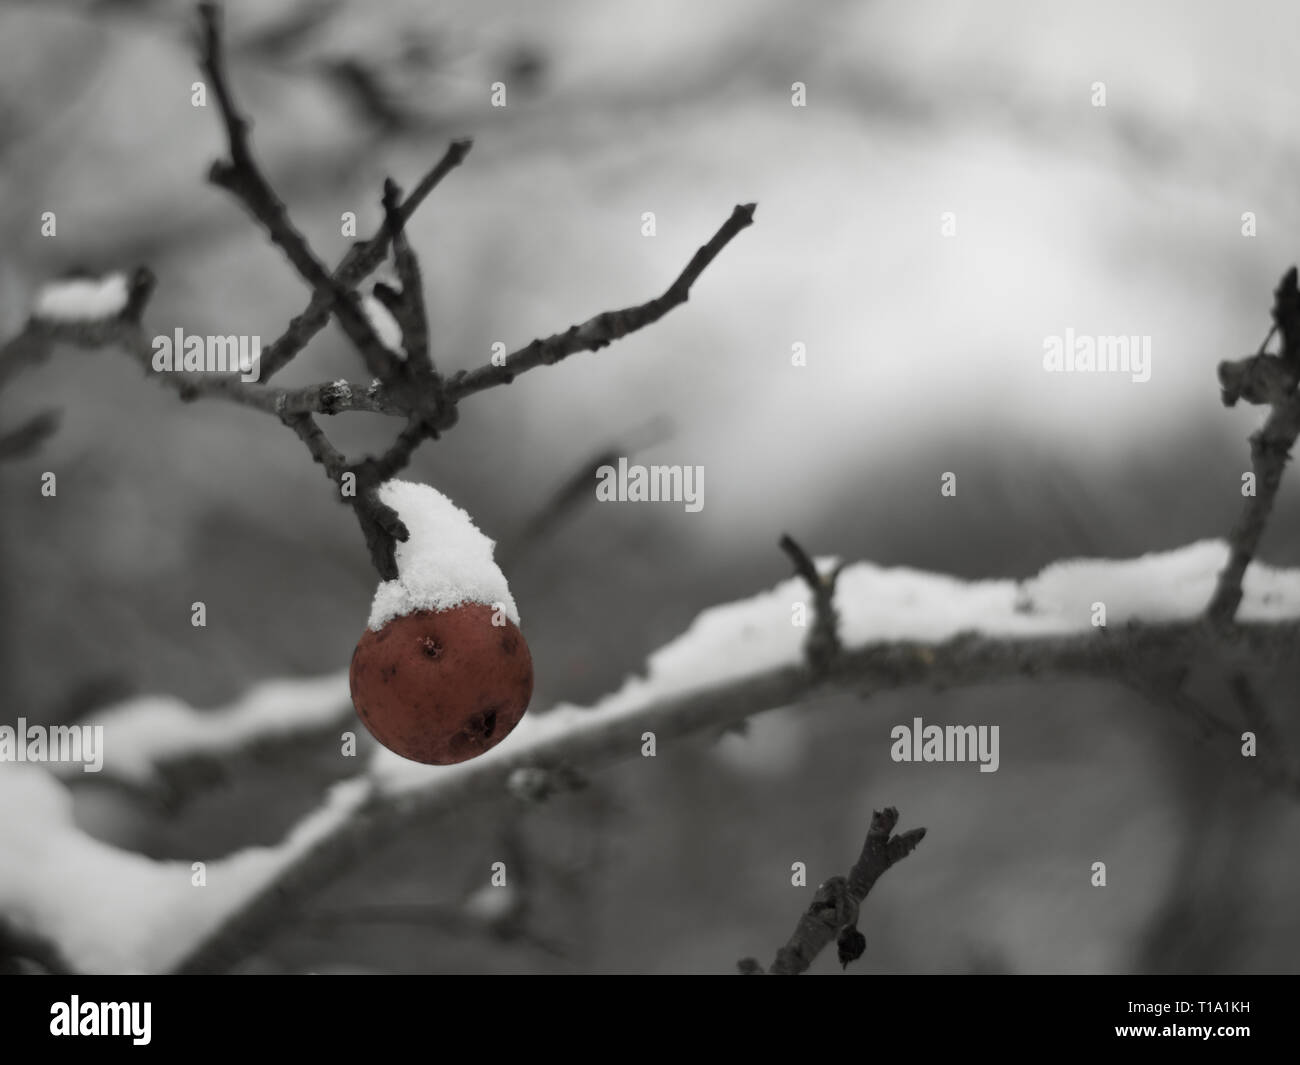 A brown rotten apple on a tree branch covered in snow on a cold winter day Stock Photo